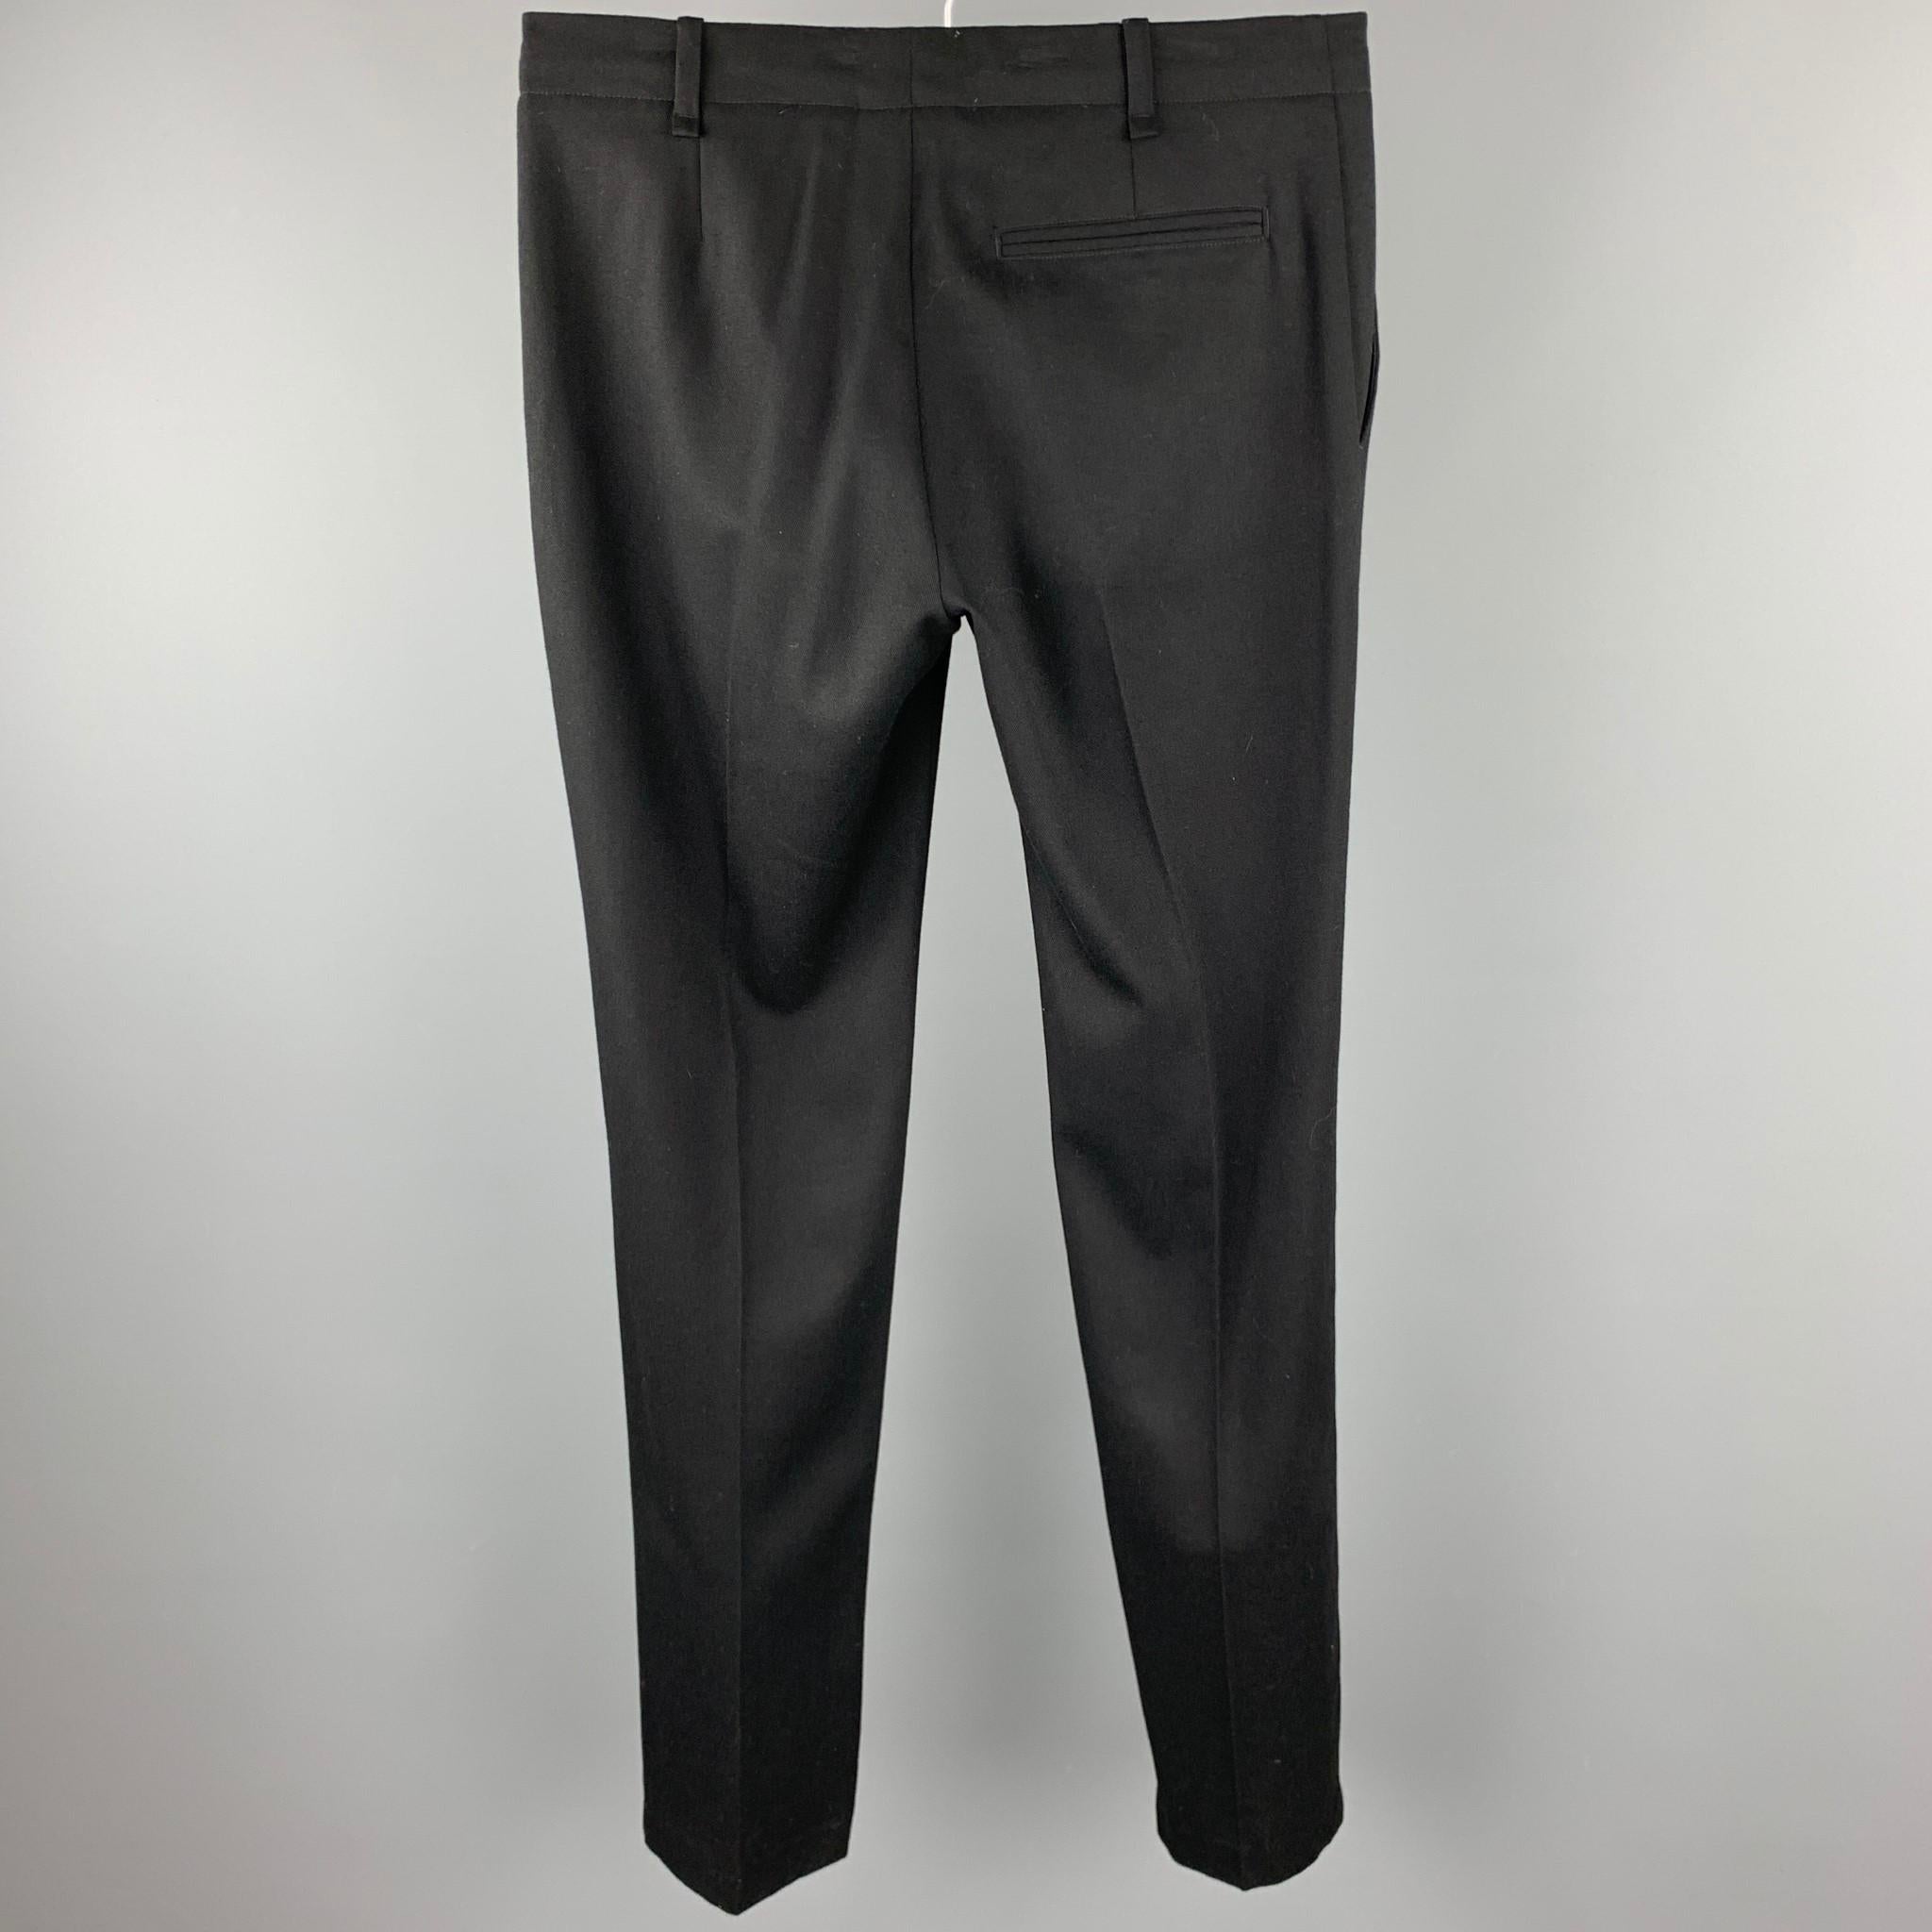 JOHN GALLIANO dress pants comes in a black wool featuring a flat front style and a zip fly closure. Made in Italy.

Excellent Pre-Owned Condition.
Marked: 34/48

Measurements:

Waist: 34 in. 
Rise: 8.5 in. 
Inseam: 35 in. 